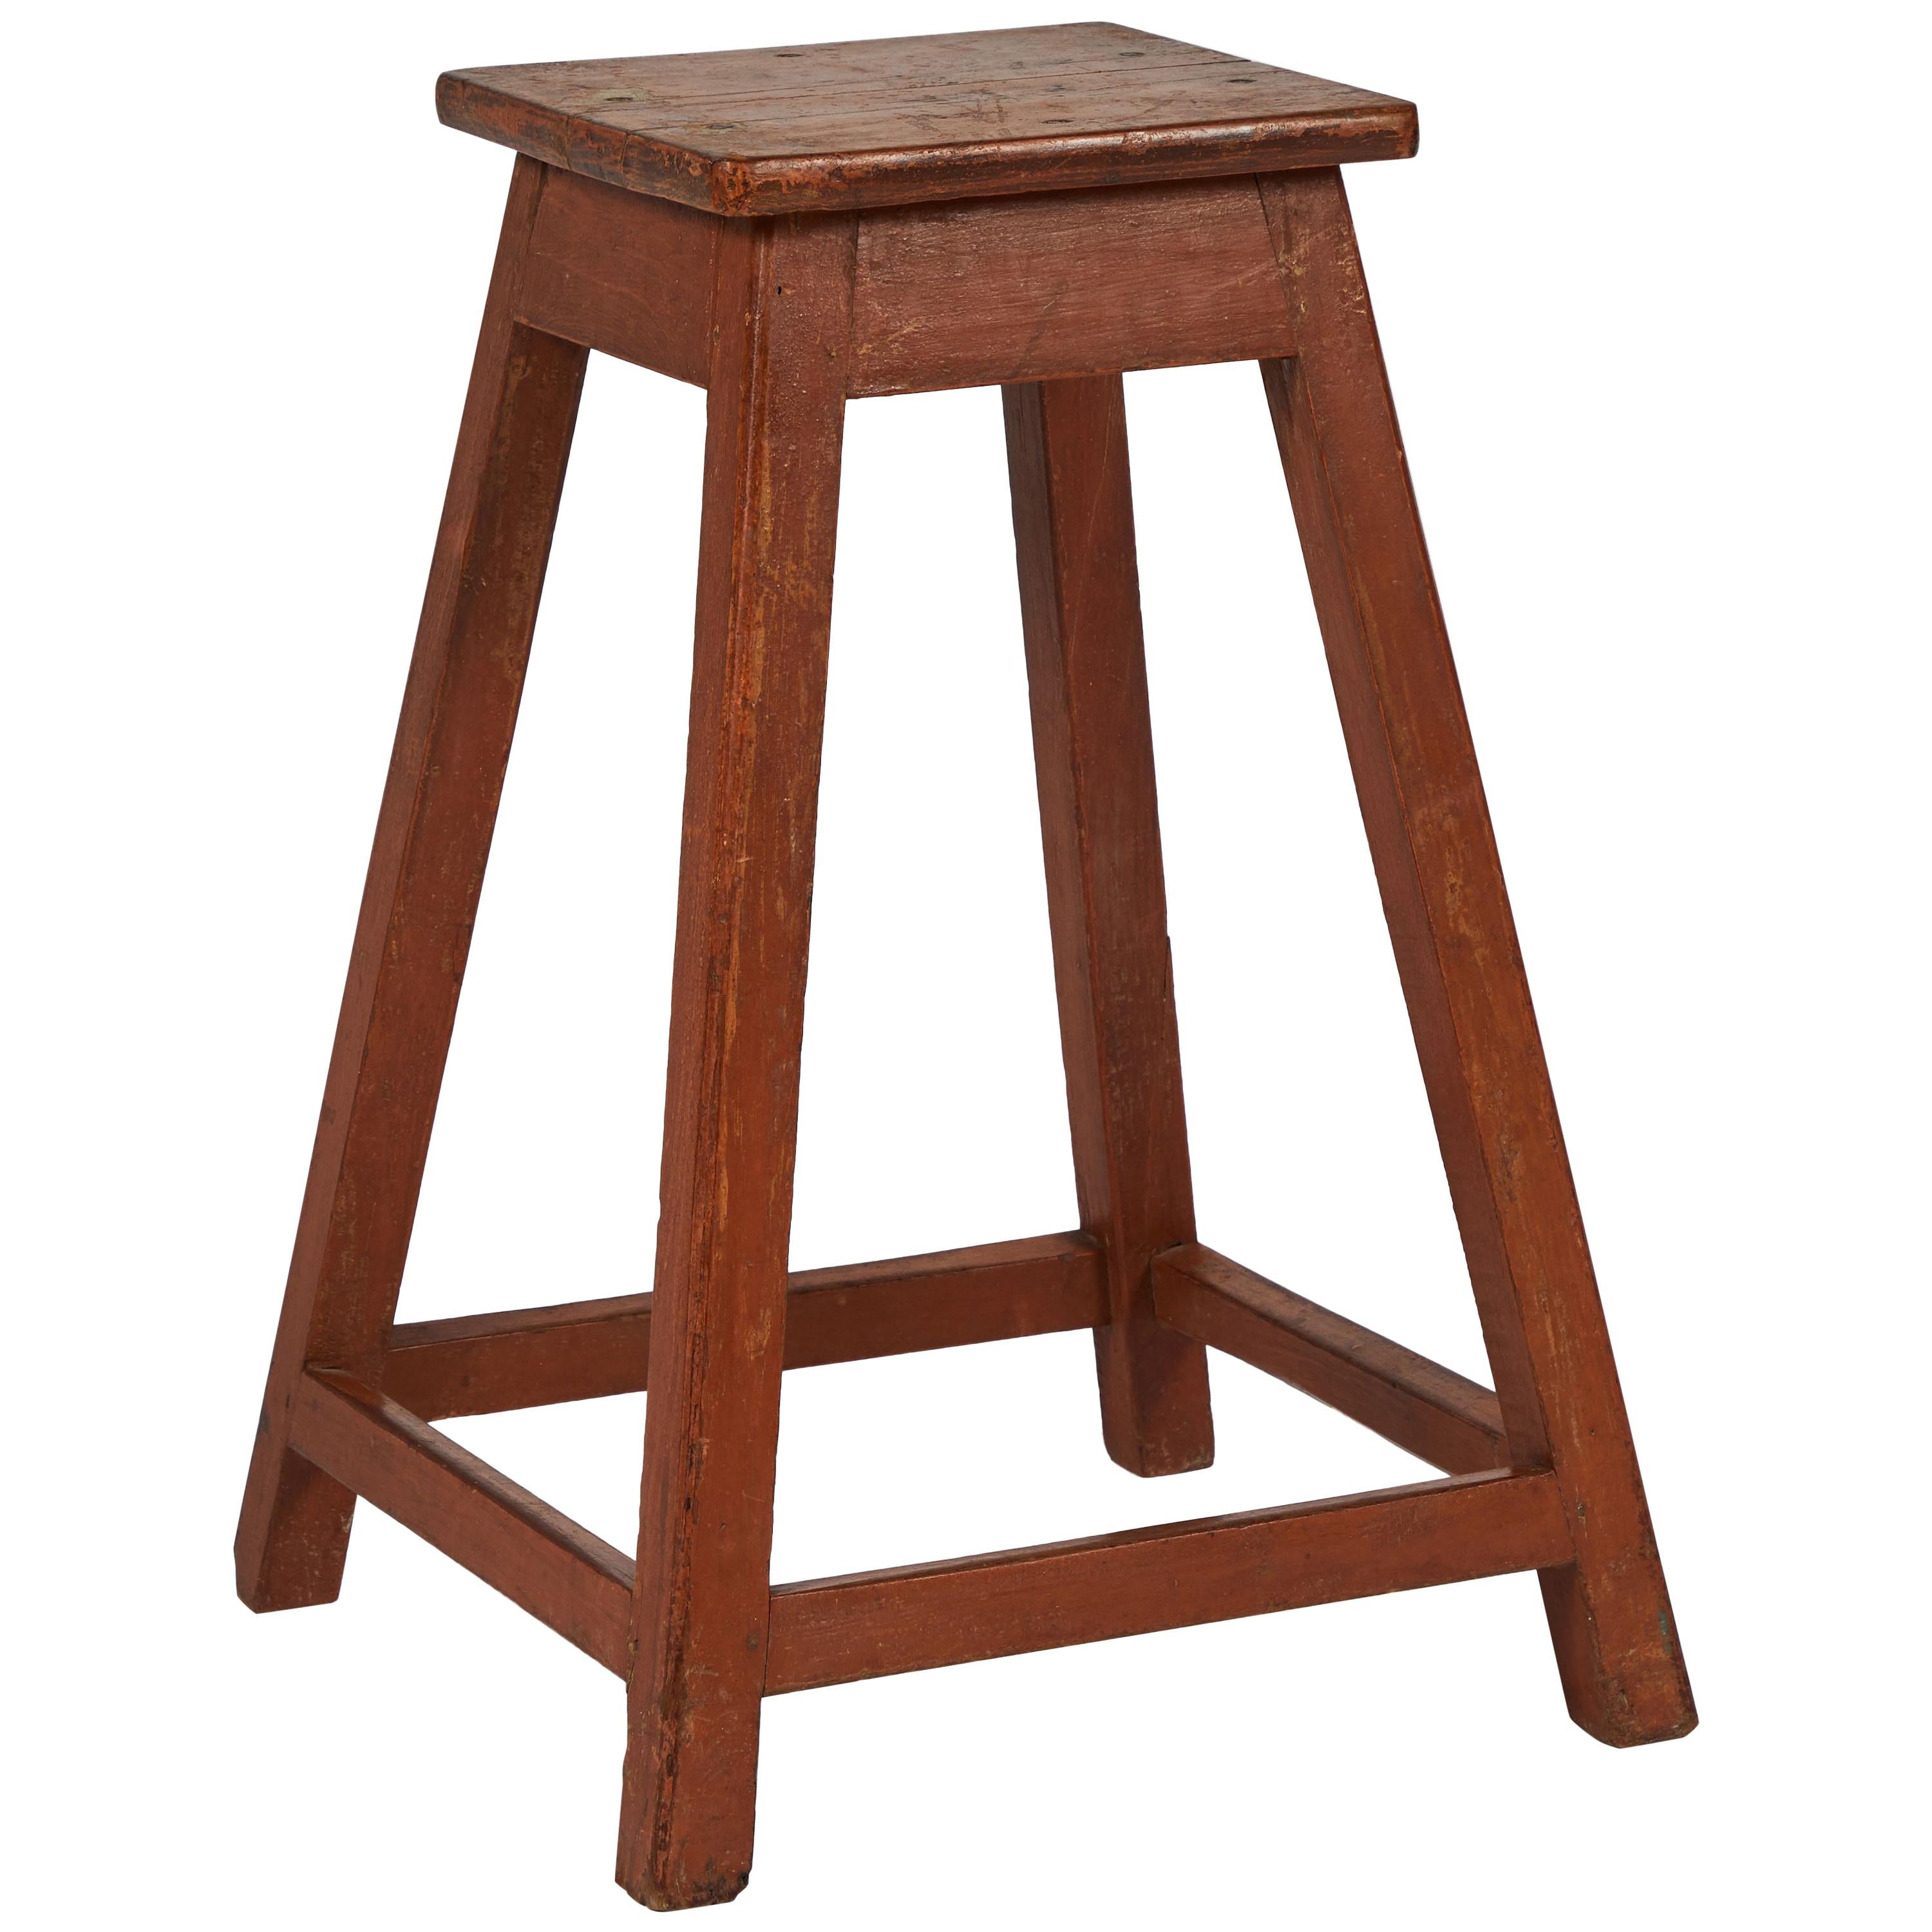 Six Simple Wooden Factory Stools from Late 19th Century France